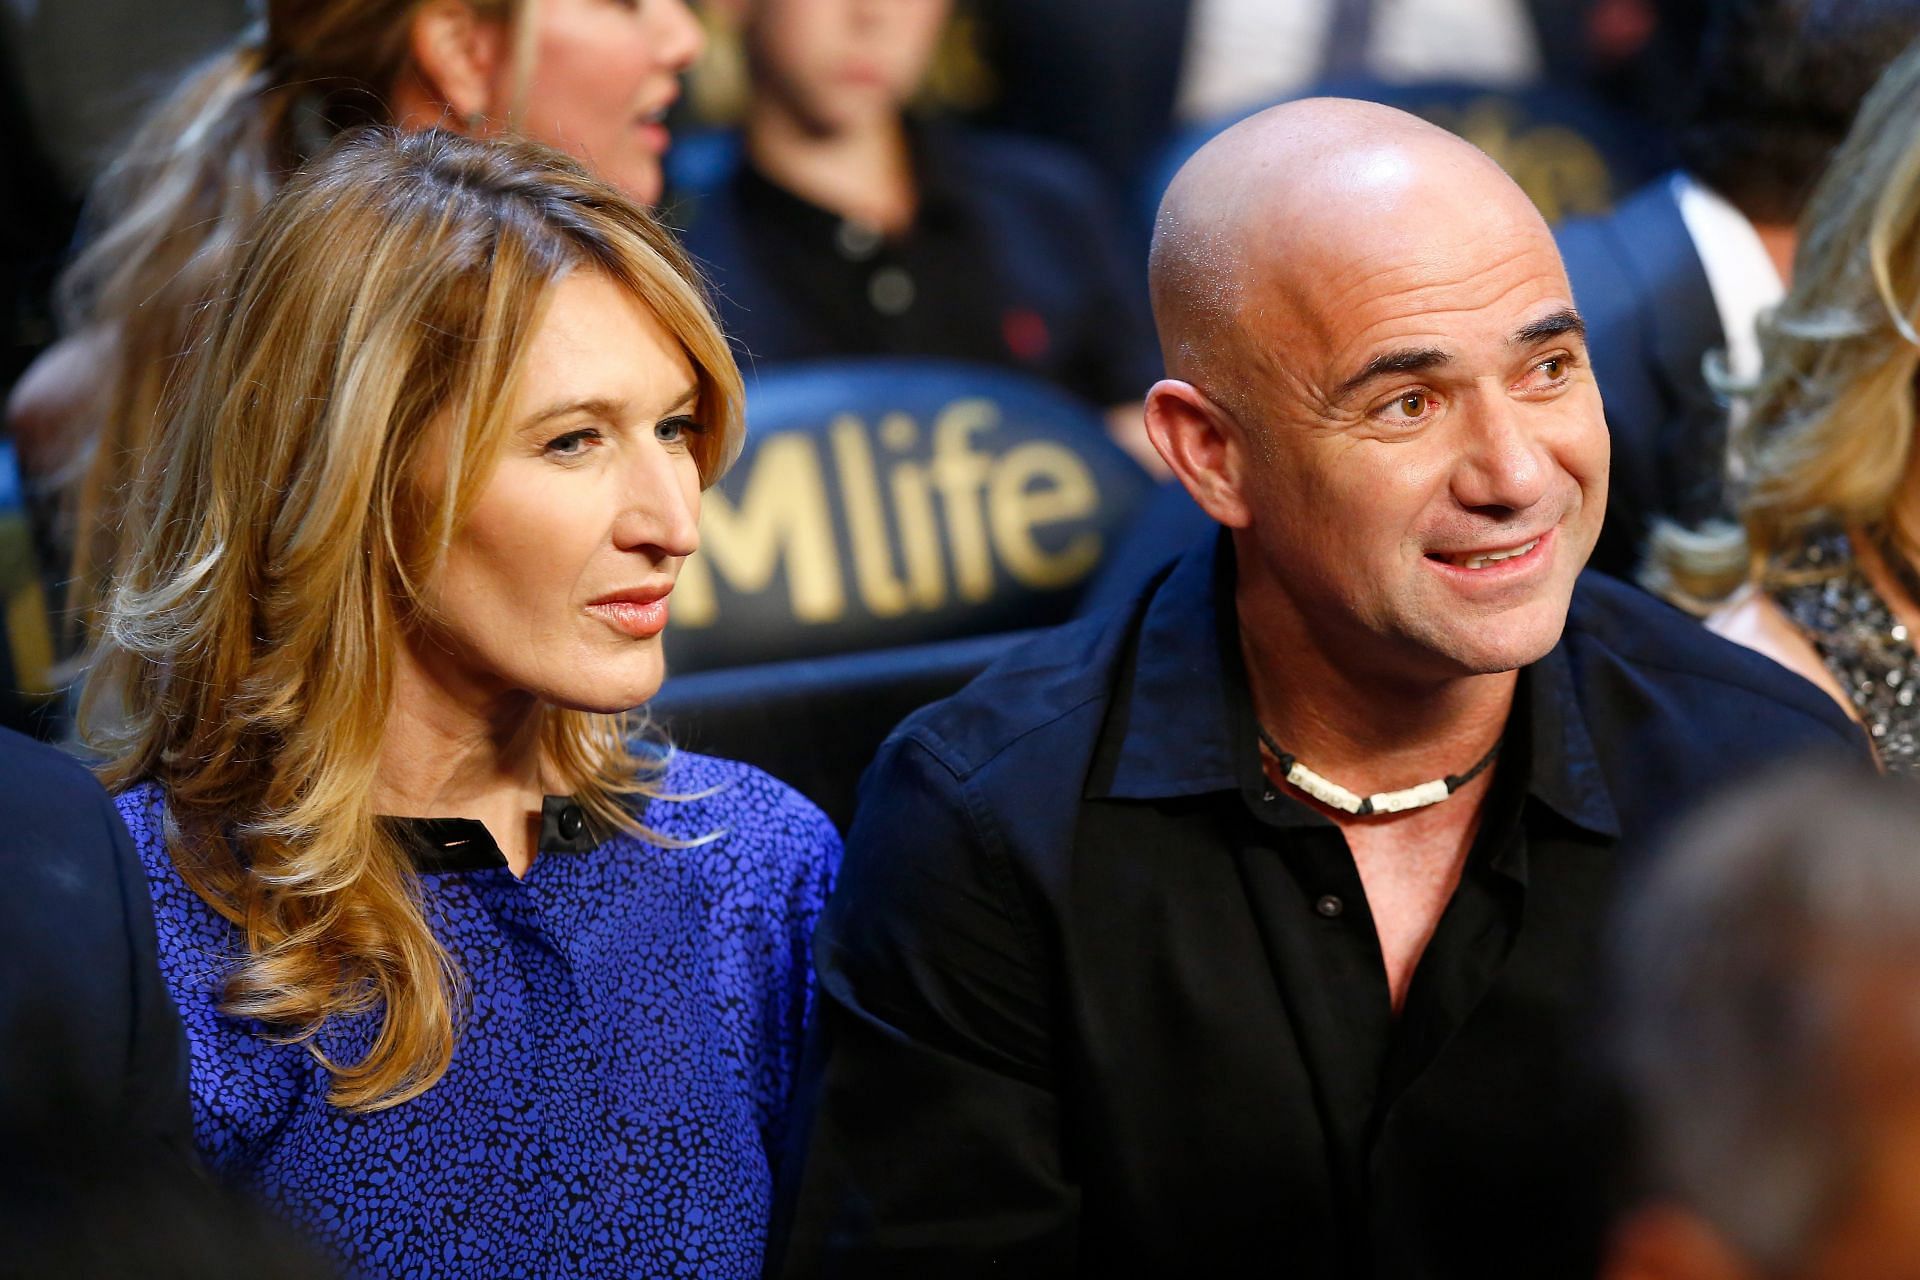 Steffi Graf and Andre Agassi at an event in Las Vegas.